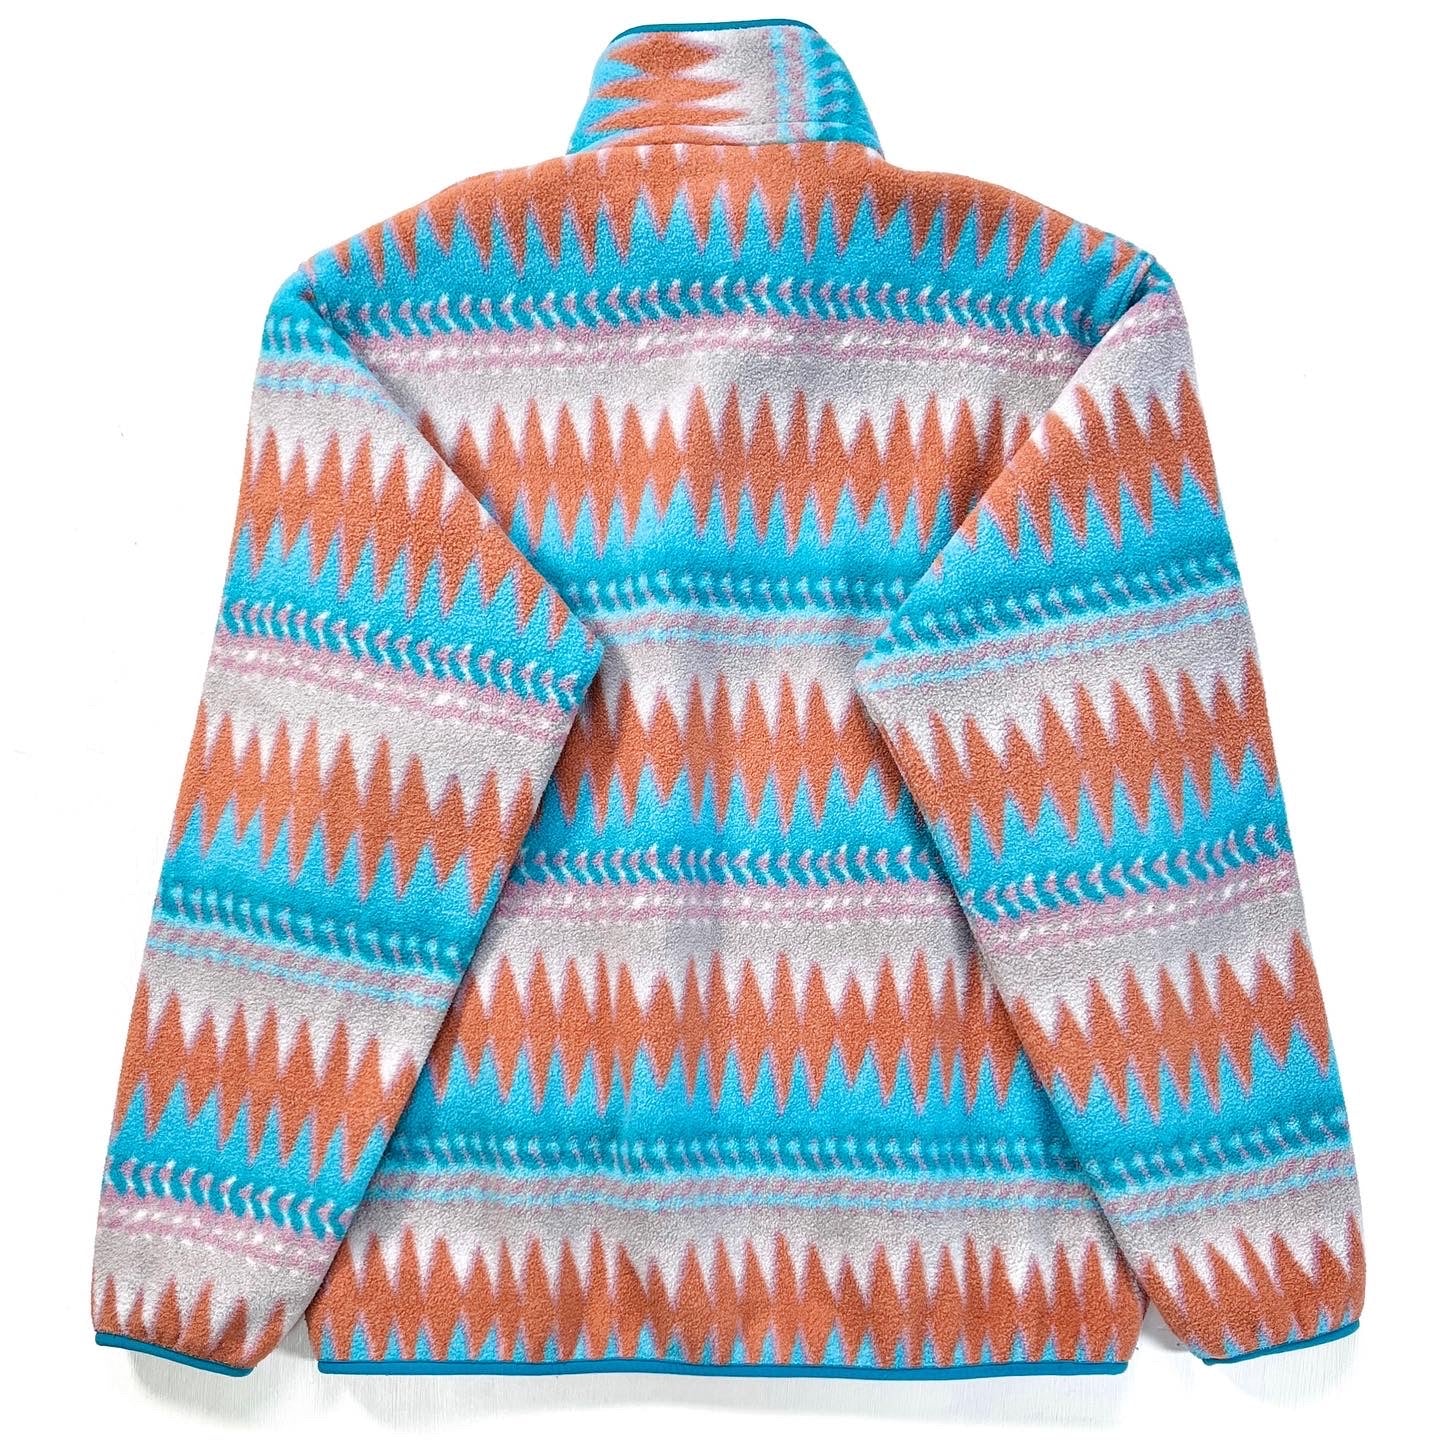 2017 Patagonia Printed Synchilla Snap-T, Laughing Waters (M)